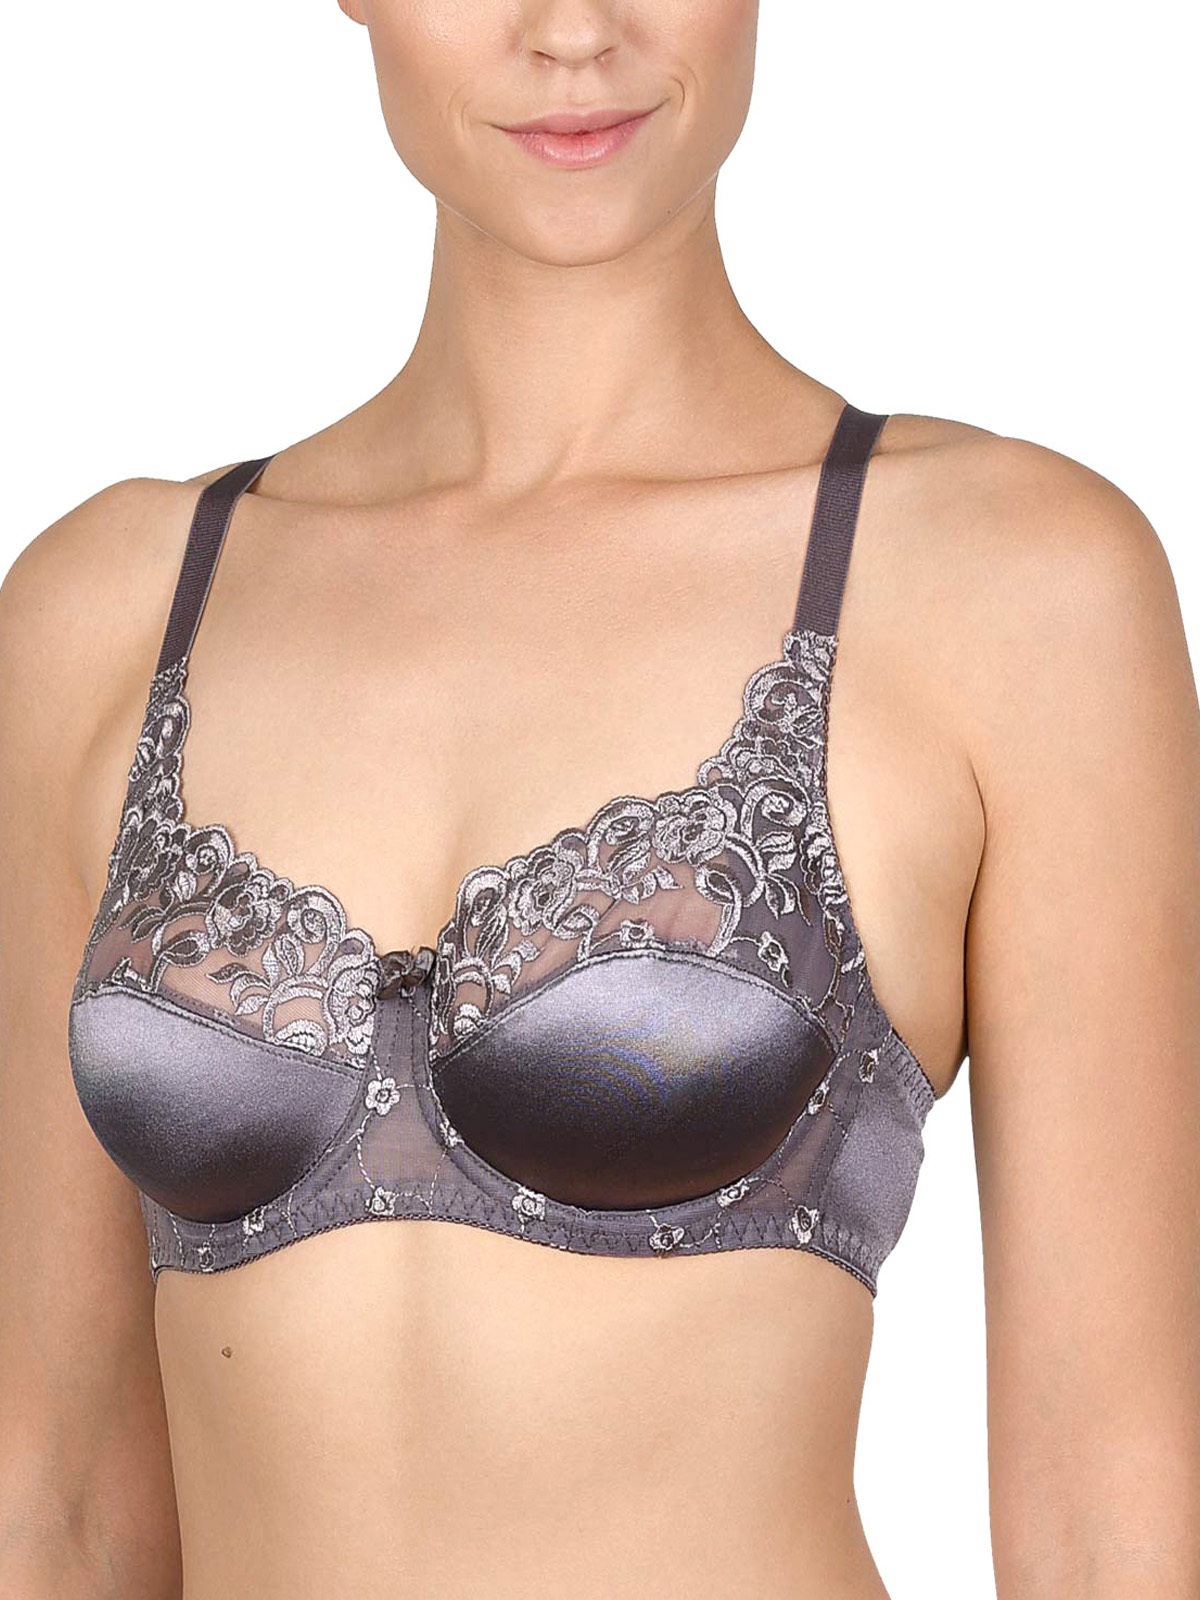 Naturana - - Naturana, Cybele, Pour Moi ASSORTED Wired Non-Padded Bras -  Size 32 to 44 (B-D)